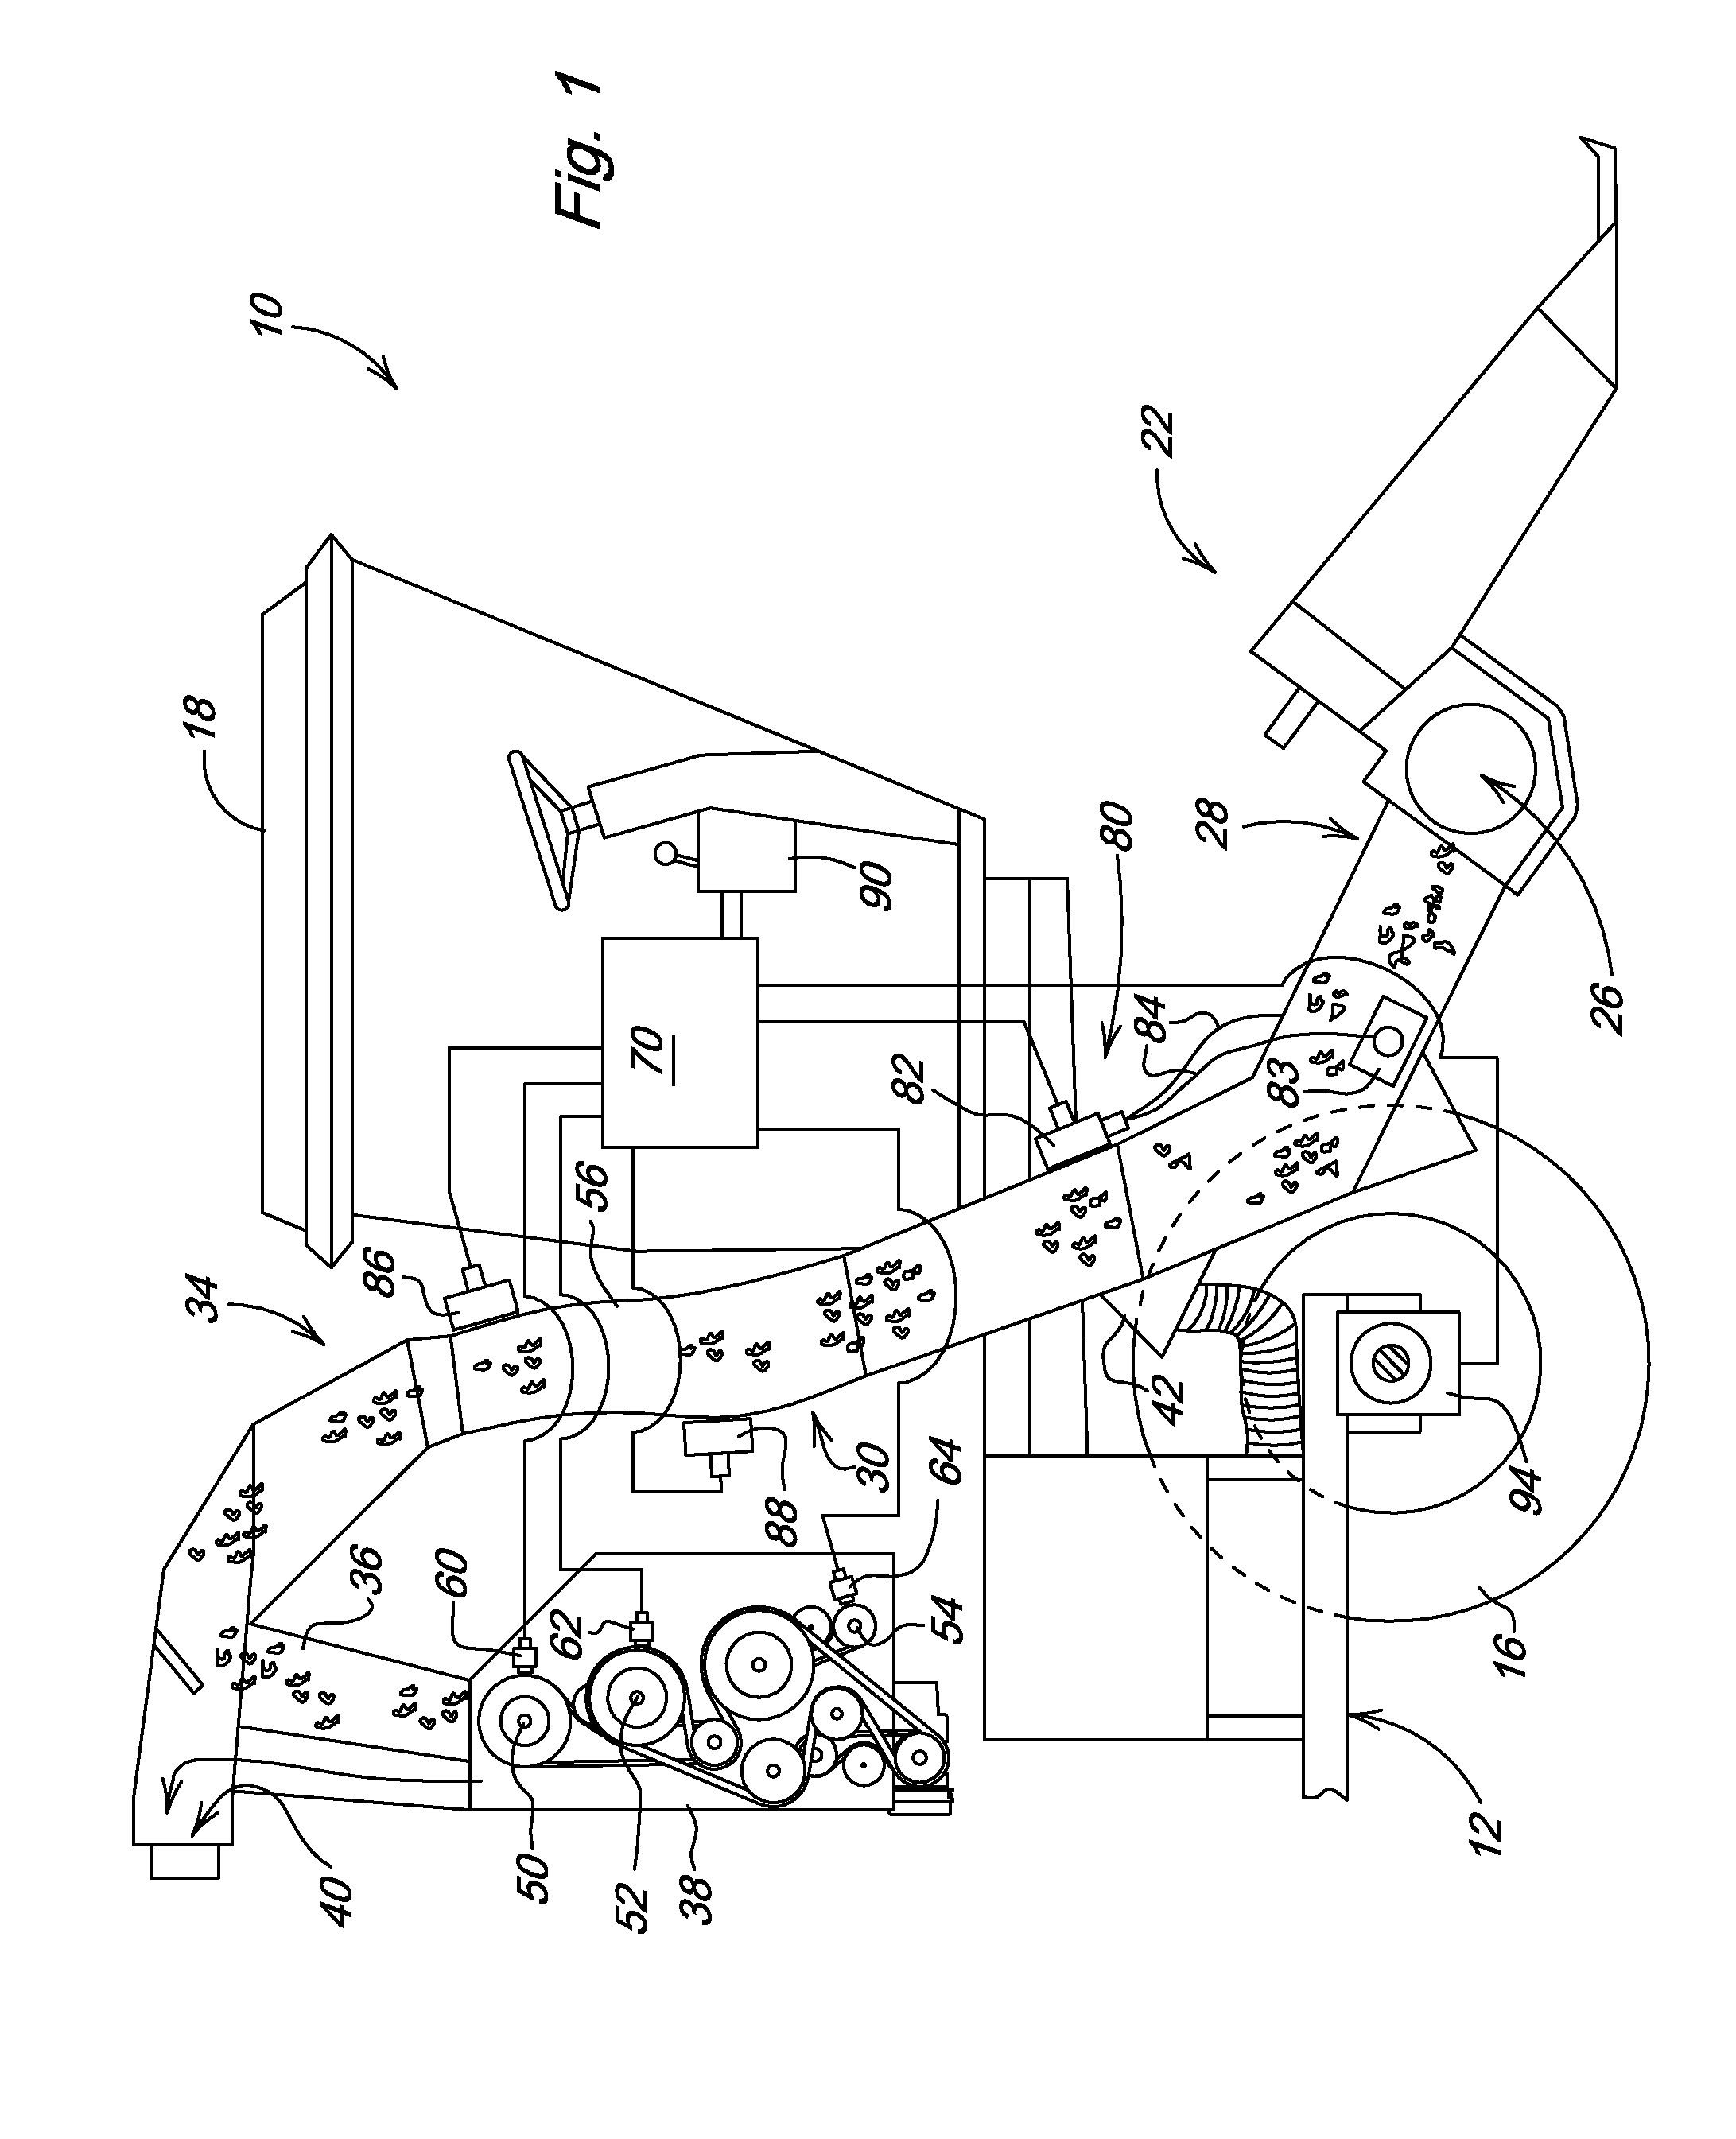 Conveying Duct Monitor System for Controlling Harvester Speed